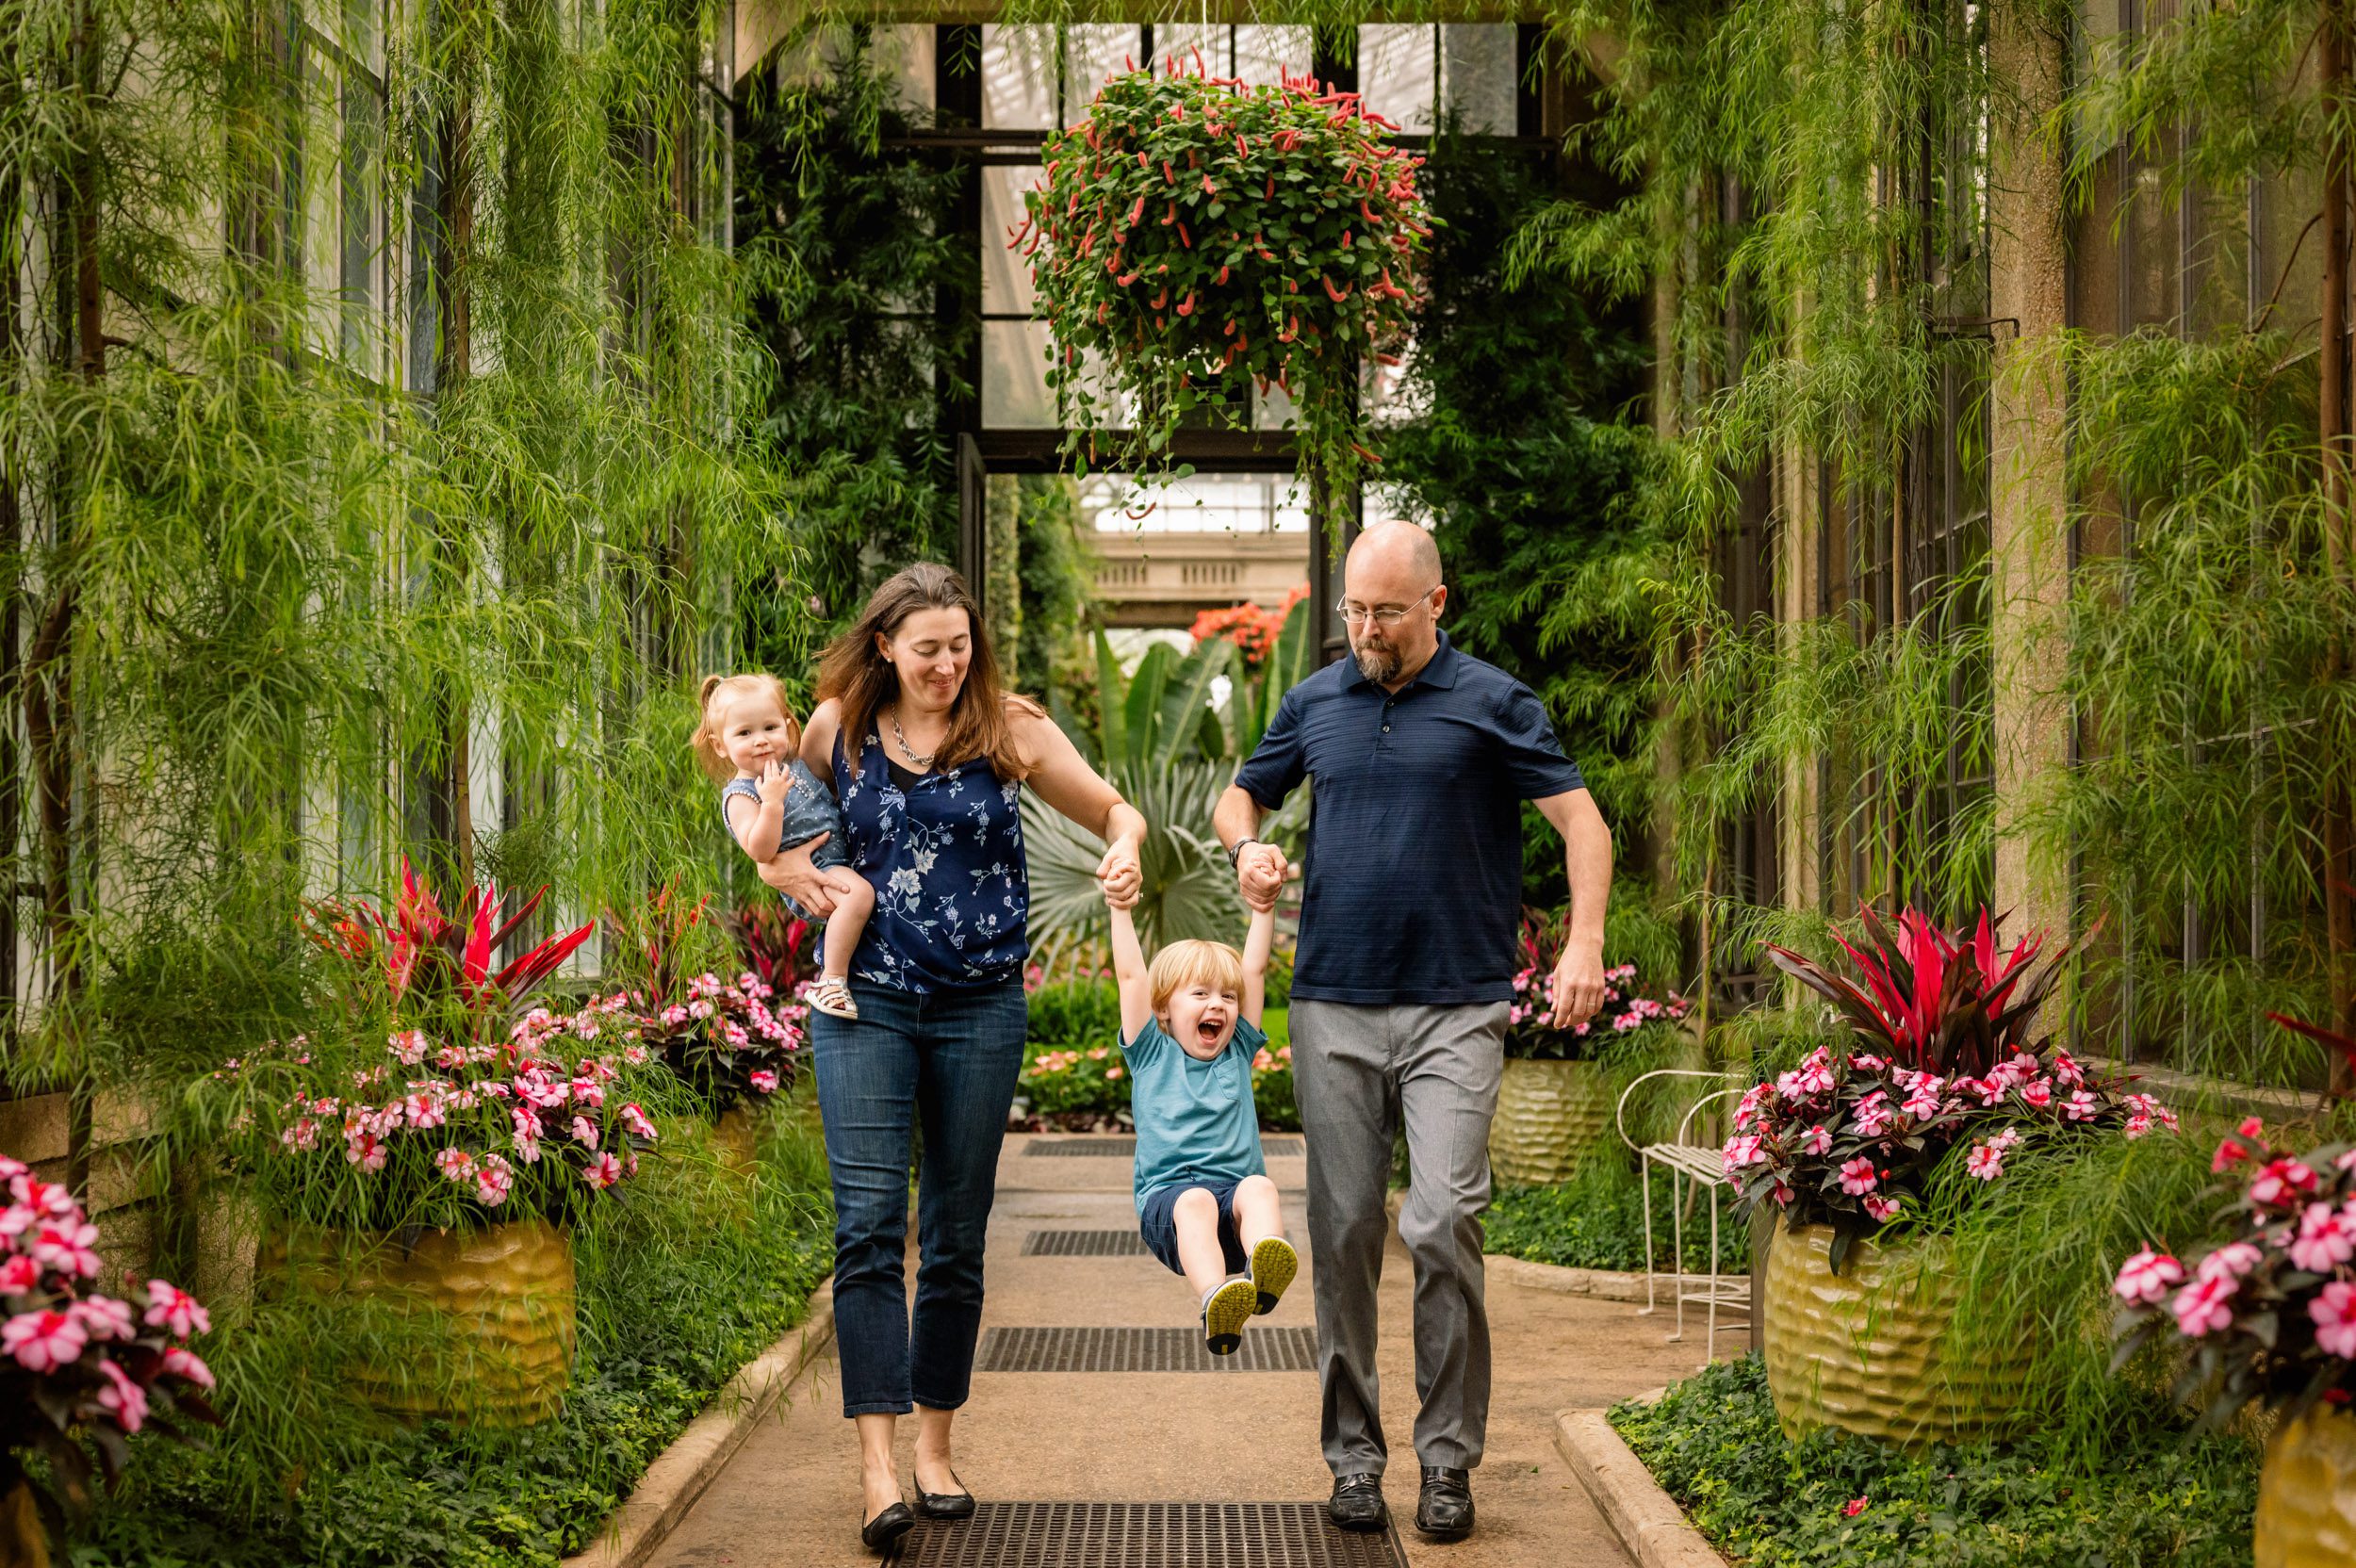 a family of four walking through a greenhouse surrounded by flowers and hanging vines on both sides as mom and dad swing their older son up in the air between them during a family photo session